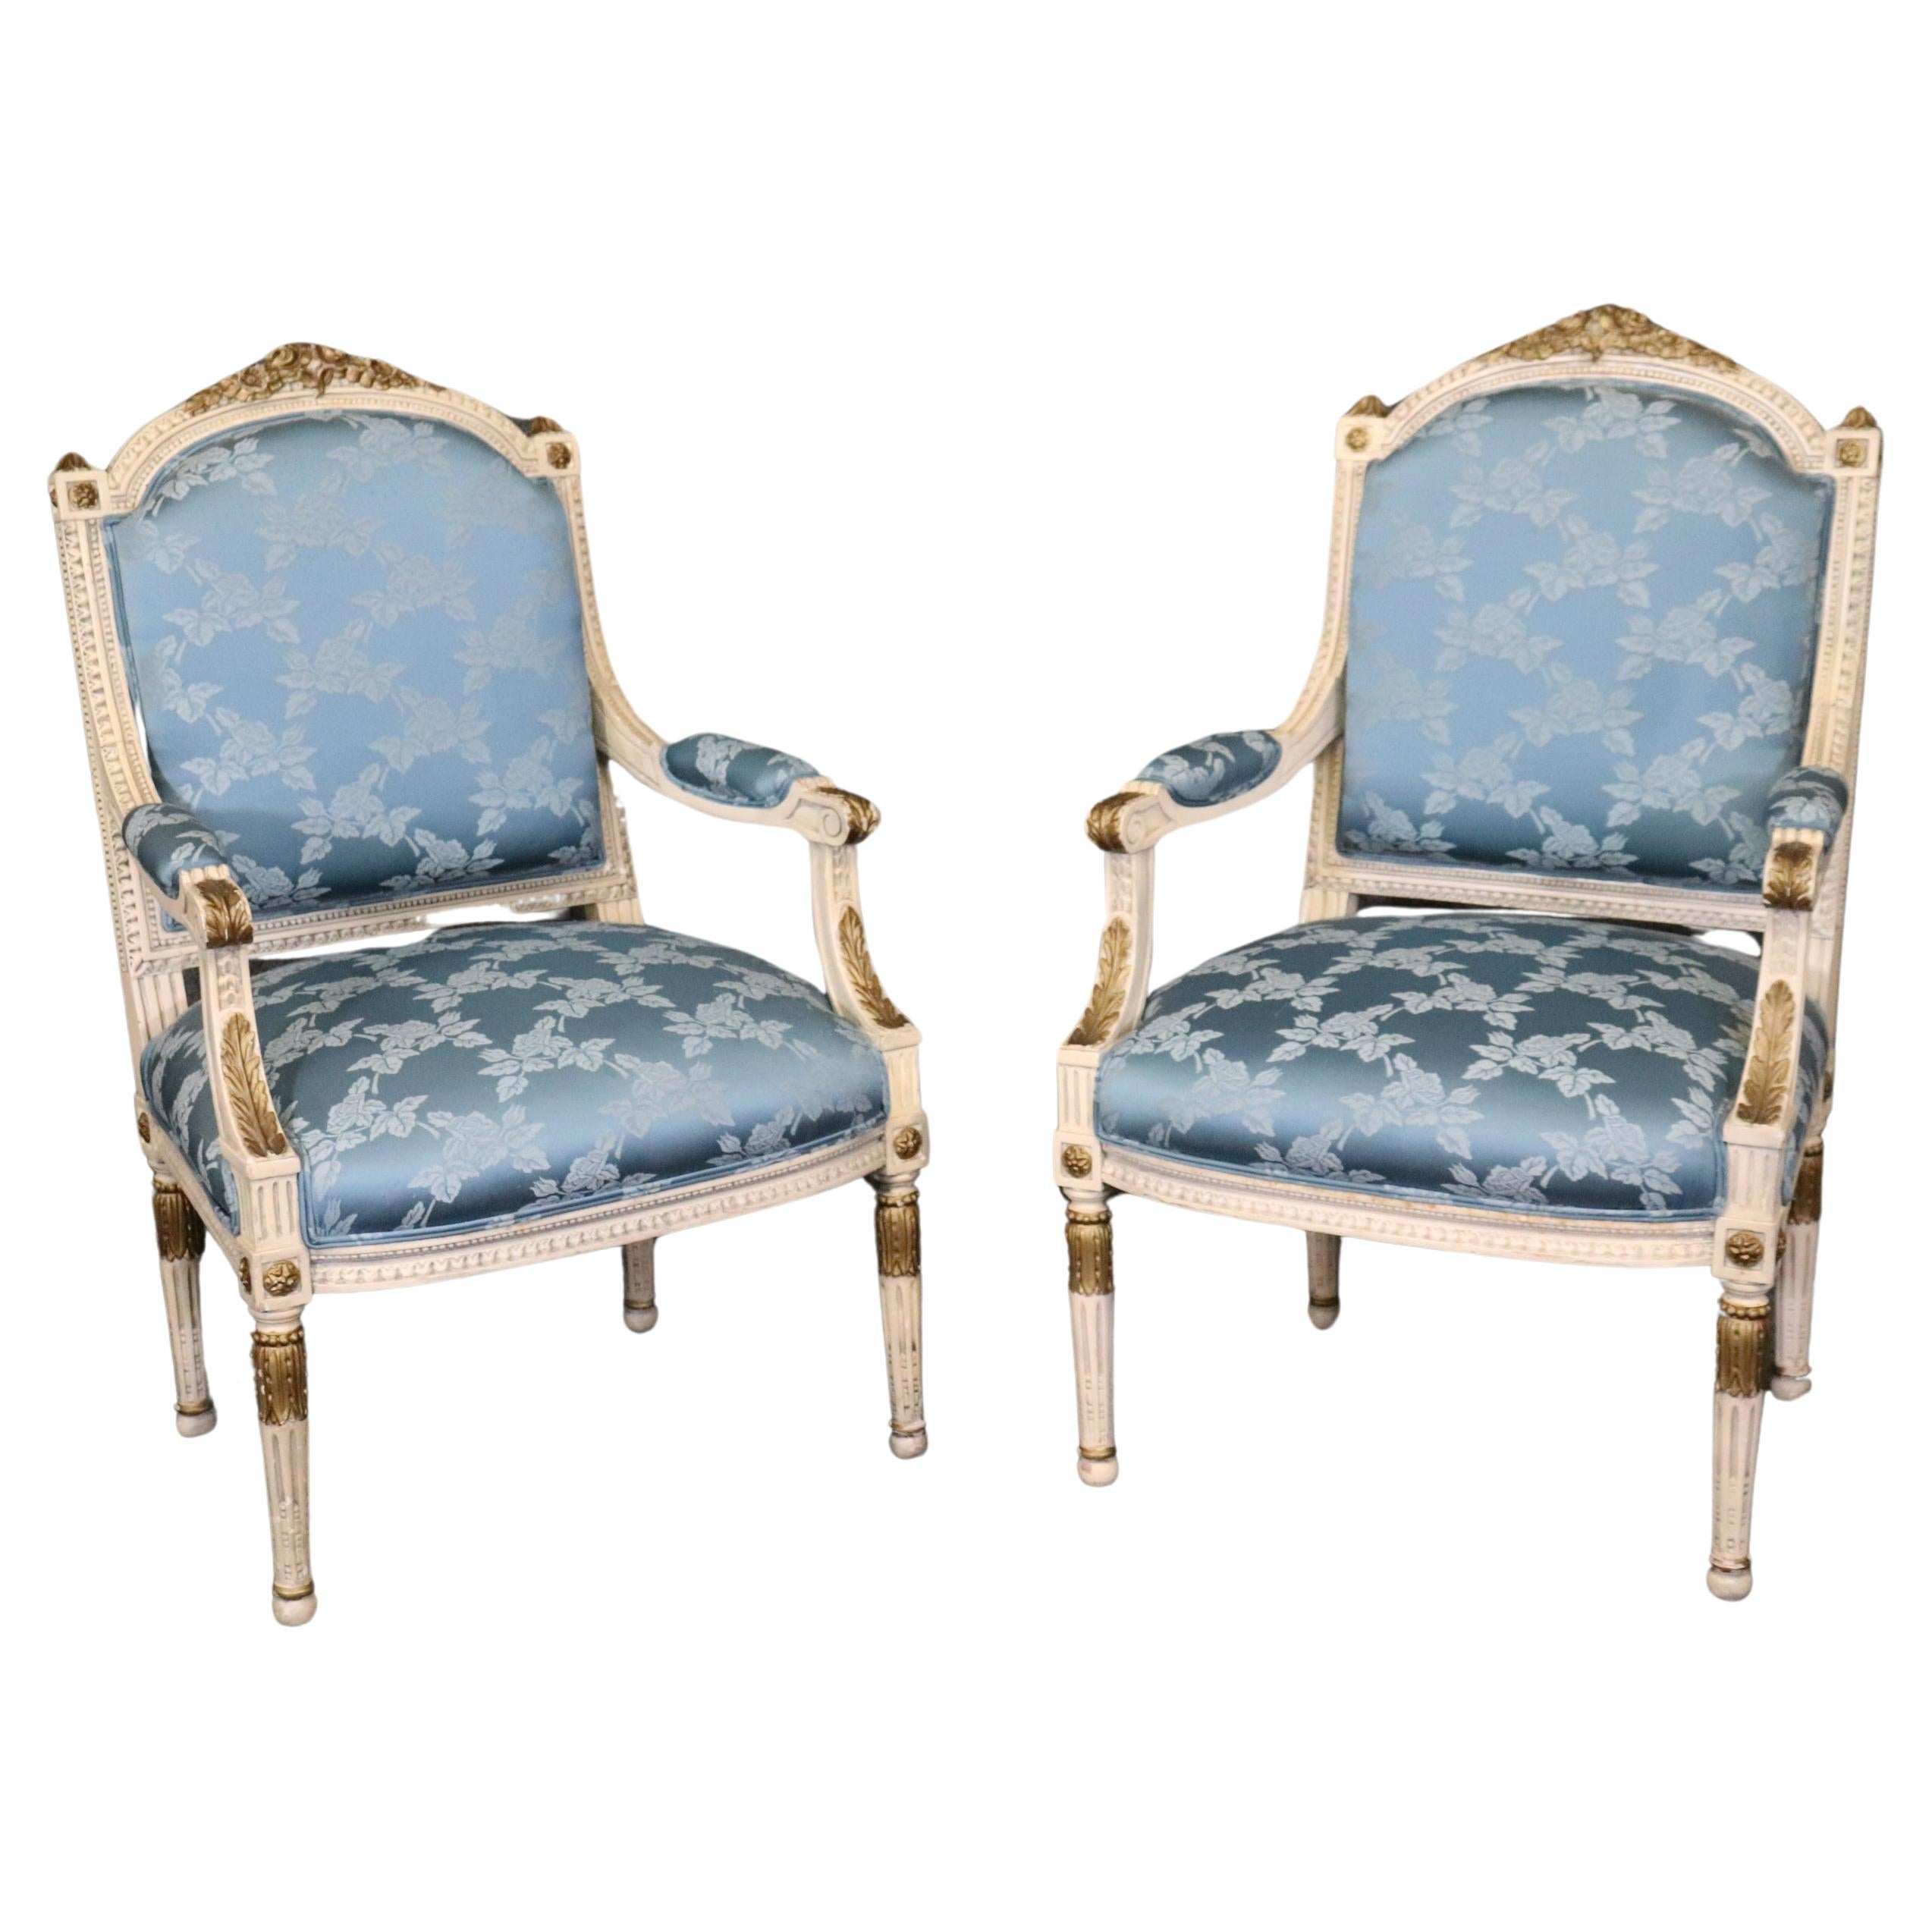 Pair Blue Silk Upholstered French Painted and Gilded louis XVI Style Armchairs